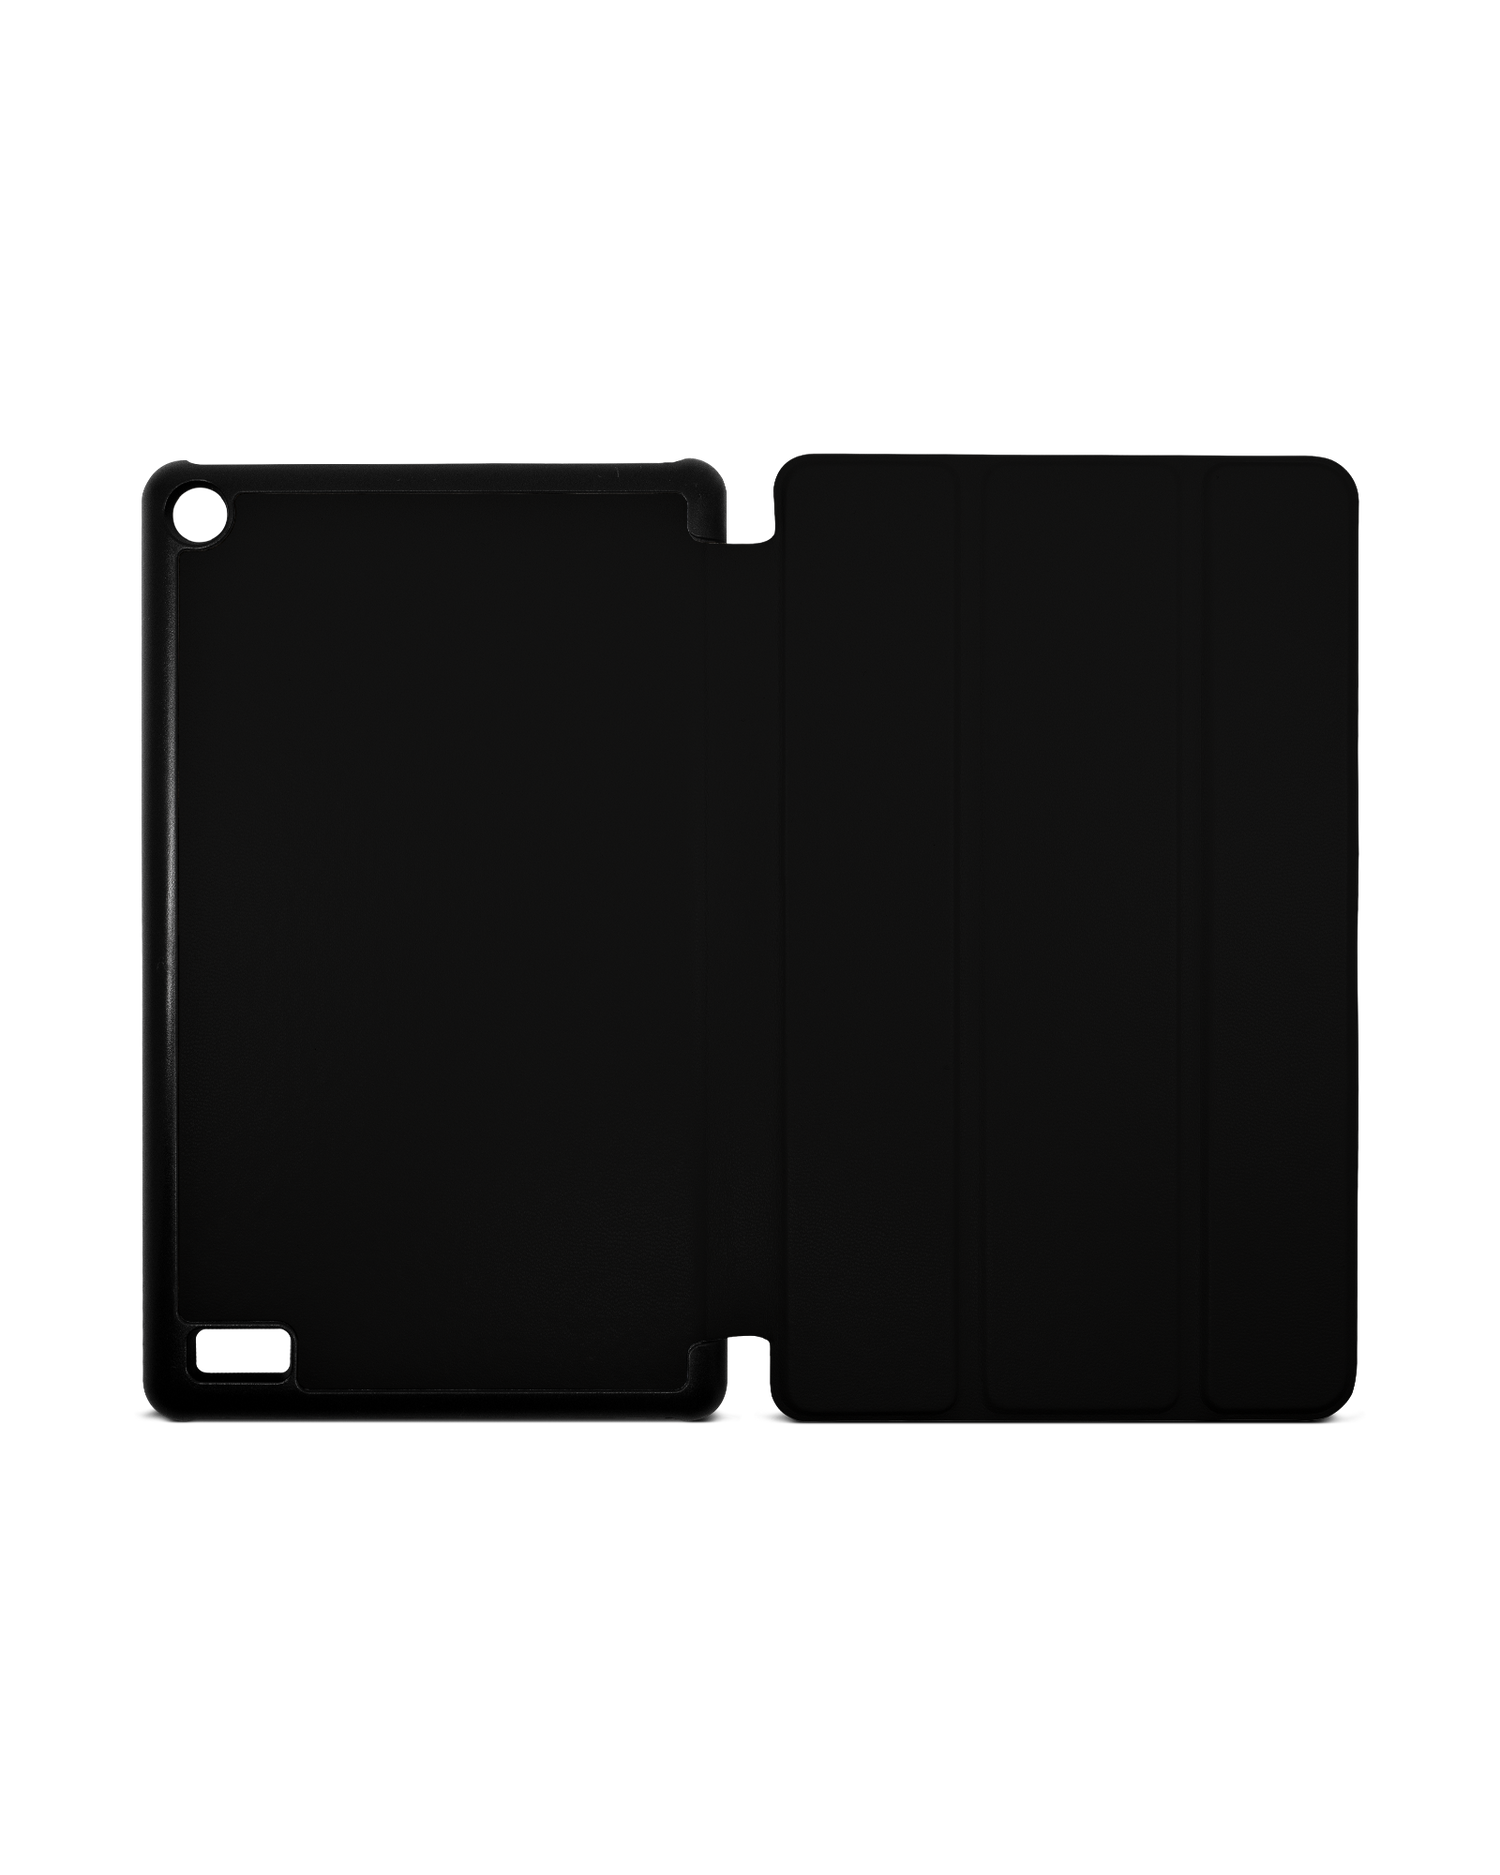 BLACK Tablet Smart Case for Amazon Fire 7: Opened